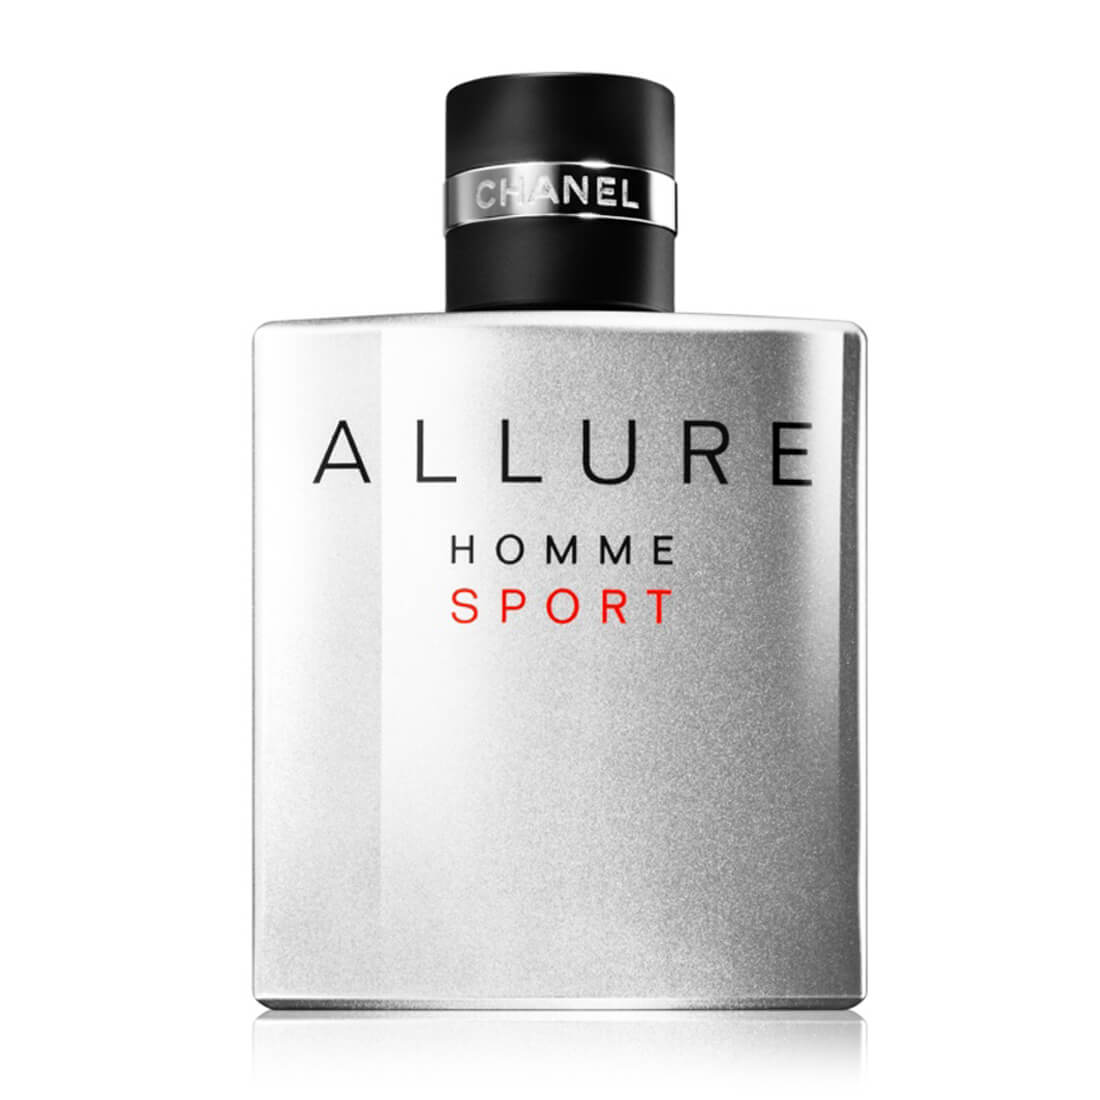 chanel cologne homme